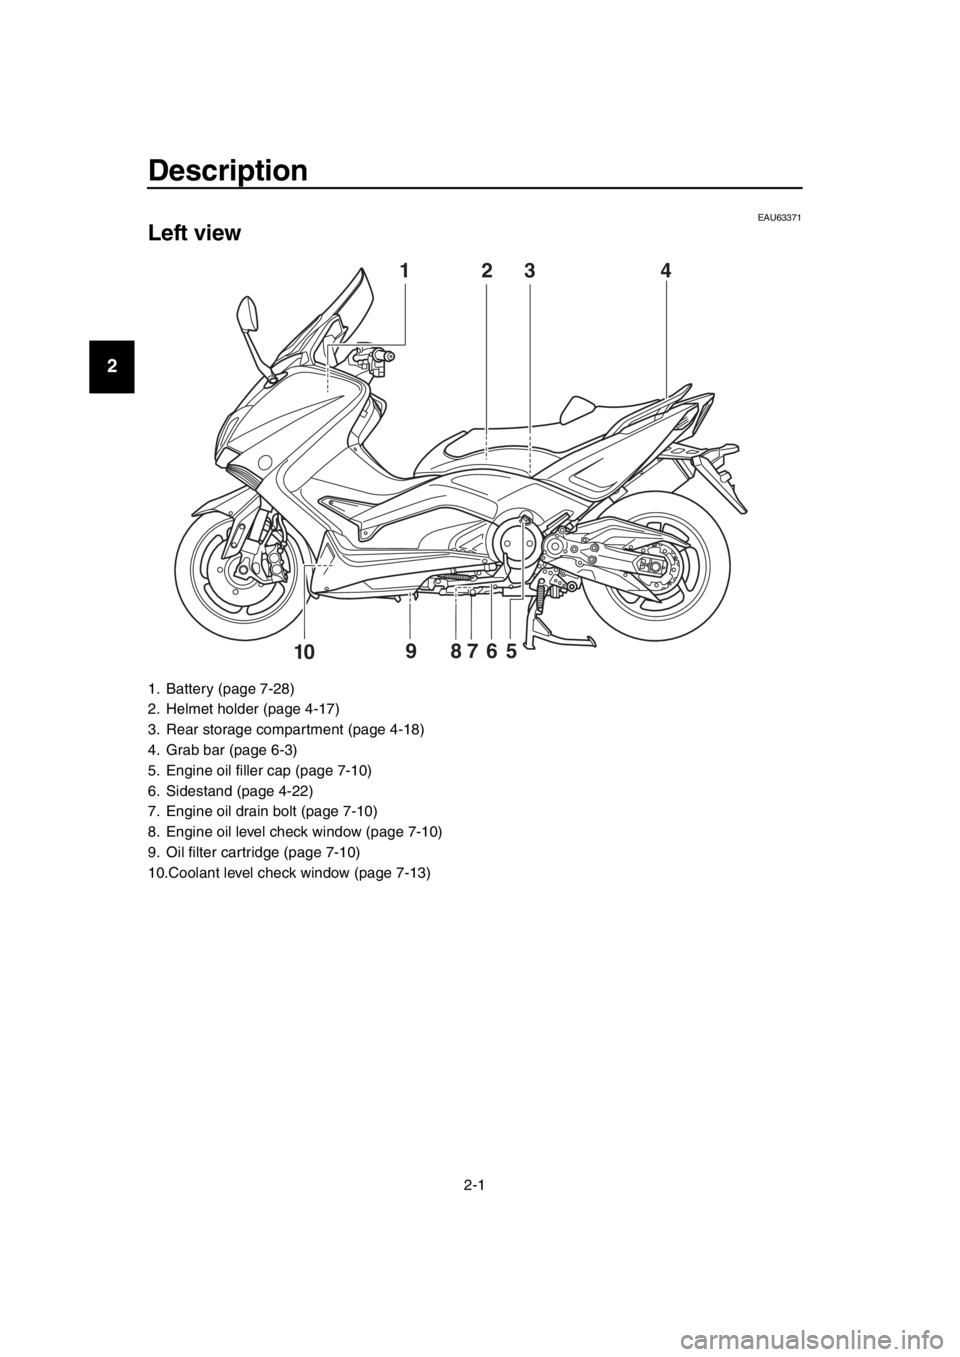 YAMAHA TMAX 2016  Owners Manual 2-1
1
2
3
4
5
6
7
8
9
10
11
12
13
14
Description
EAU63371
Left view
1. Battery (page 7-28)
2. Helmet holder (page 4-17)
3. Rear storage compartment (page 4-18)
4. Grab bar (page 6-3)
5. Engine oil fil